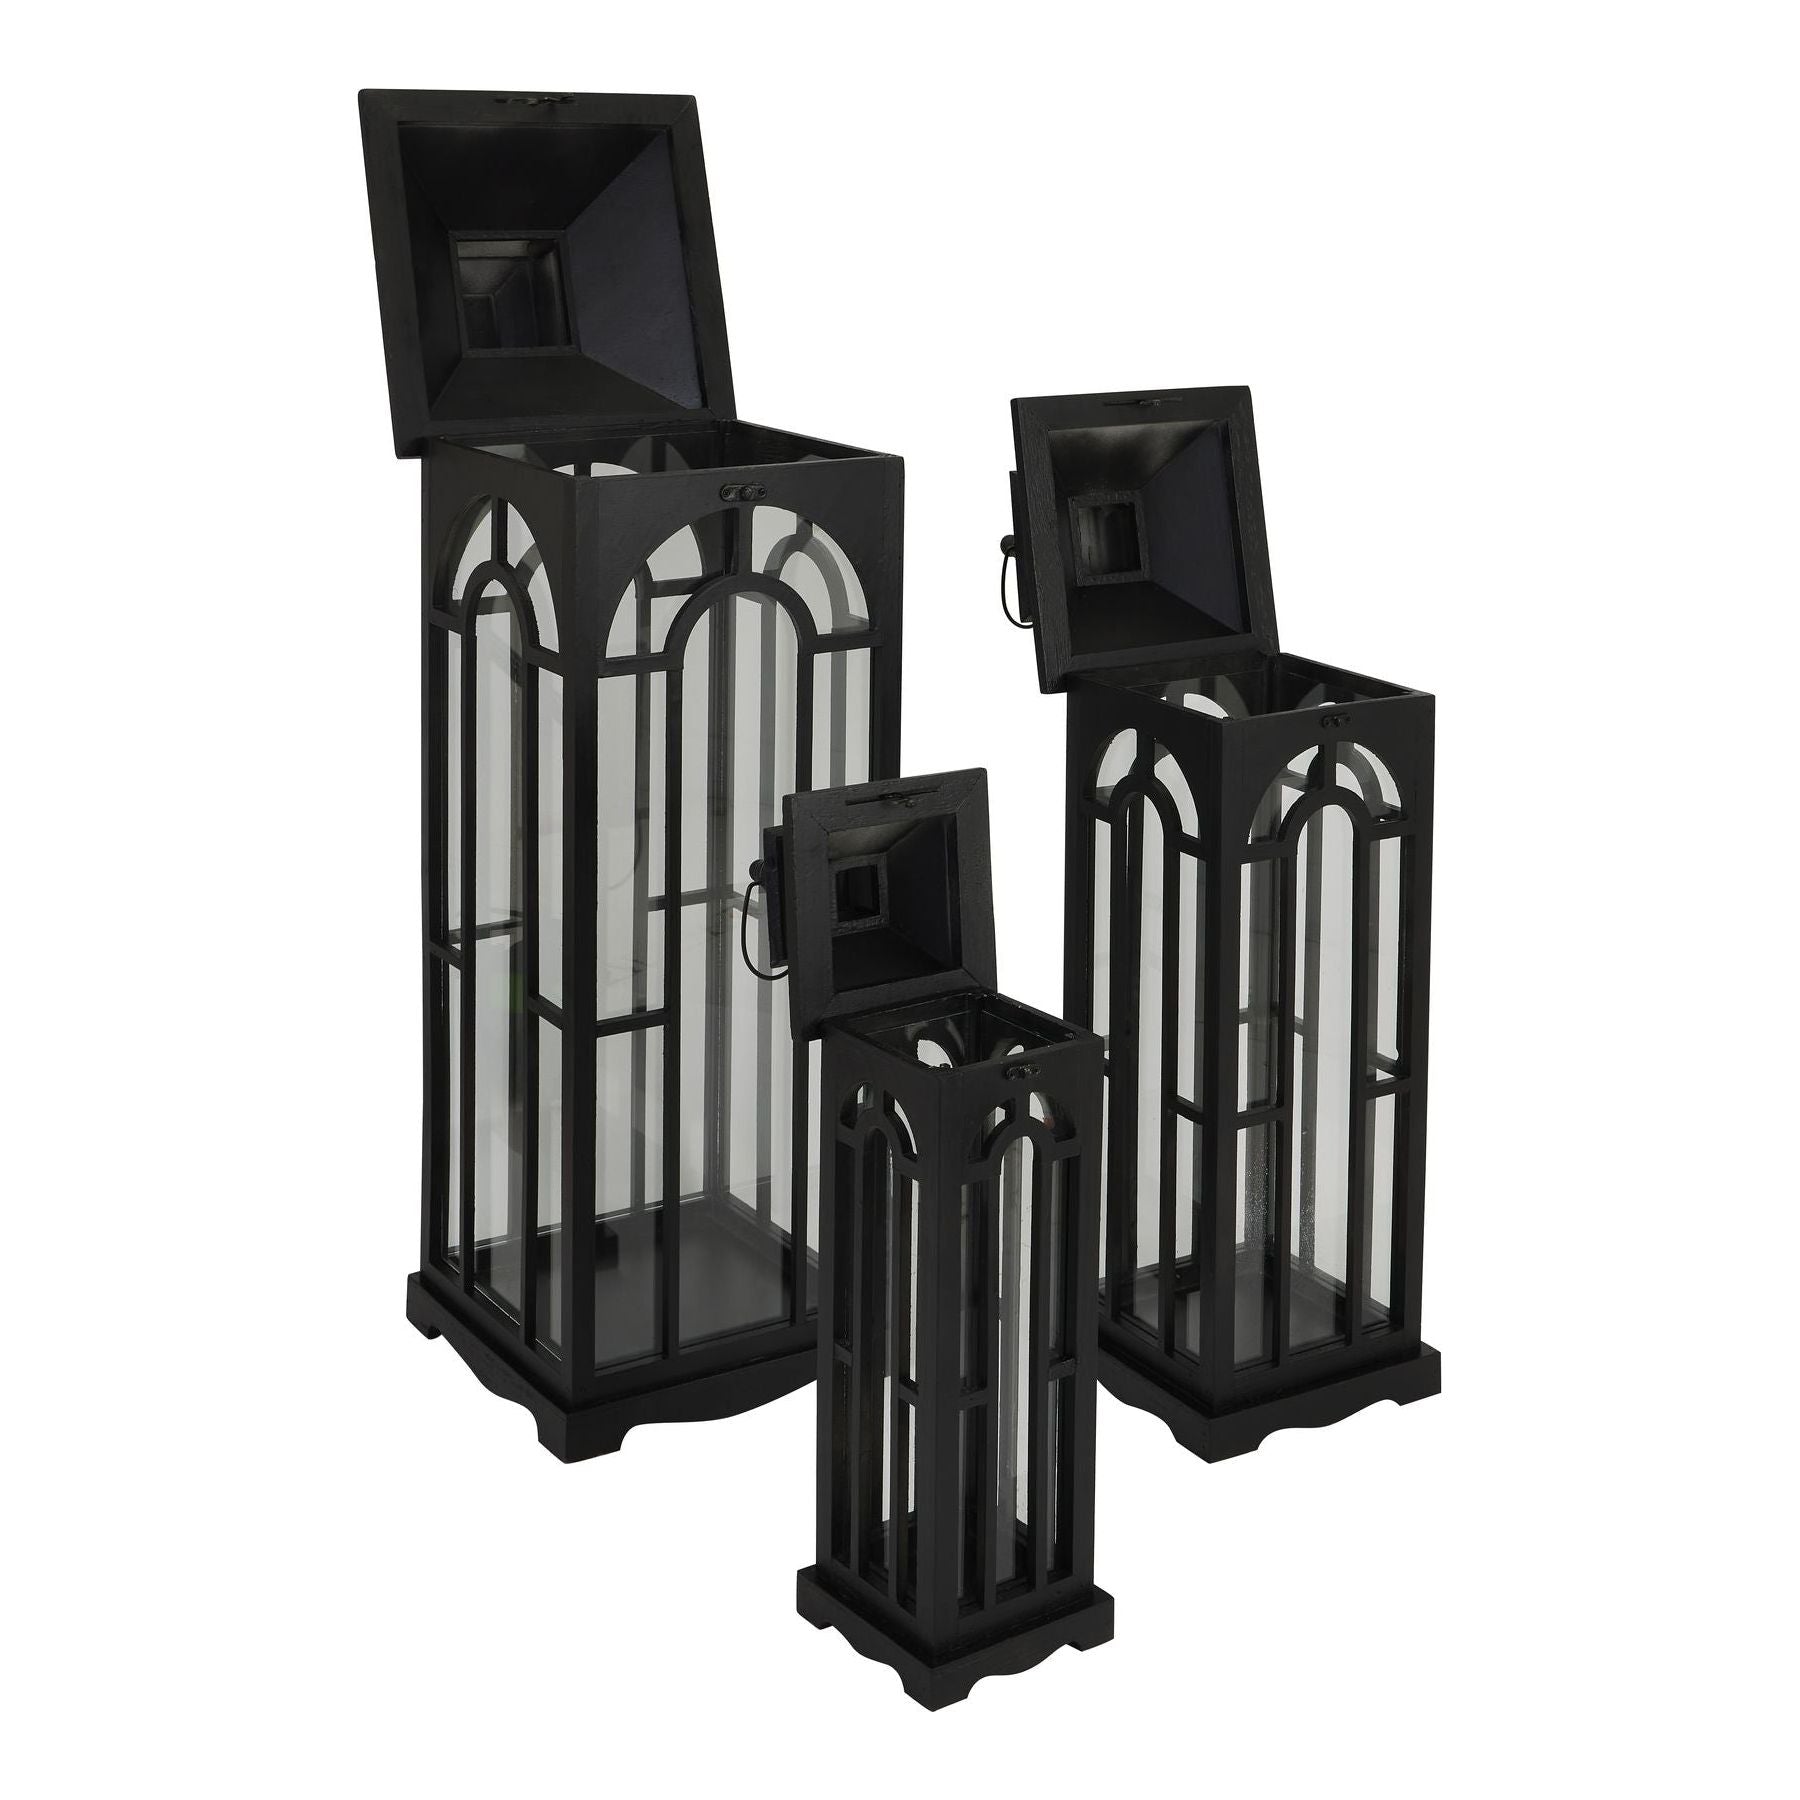 Set Of Three Black Wooden Lanterns With Archway Design - Ashton and Finch